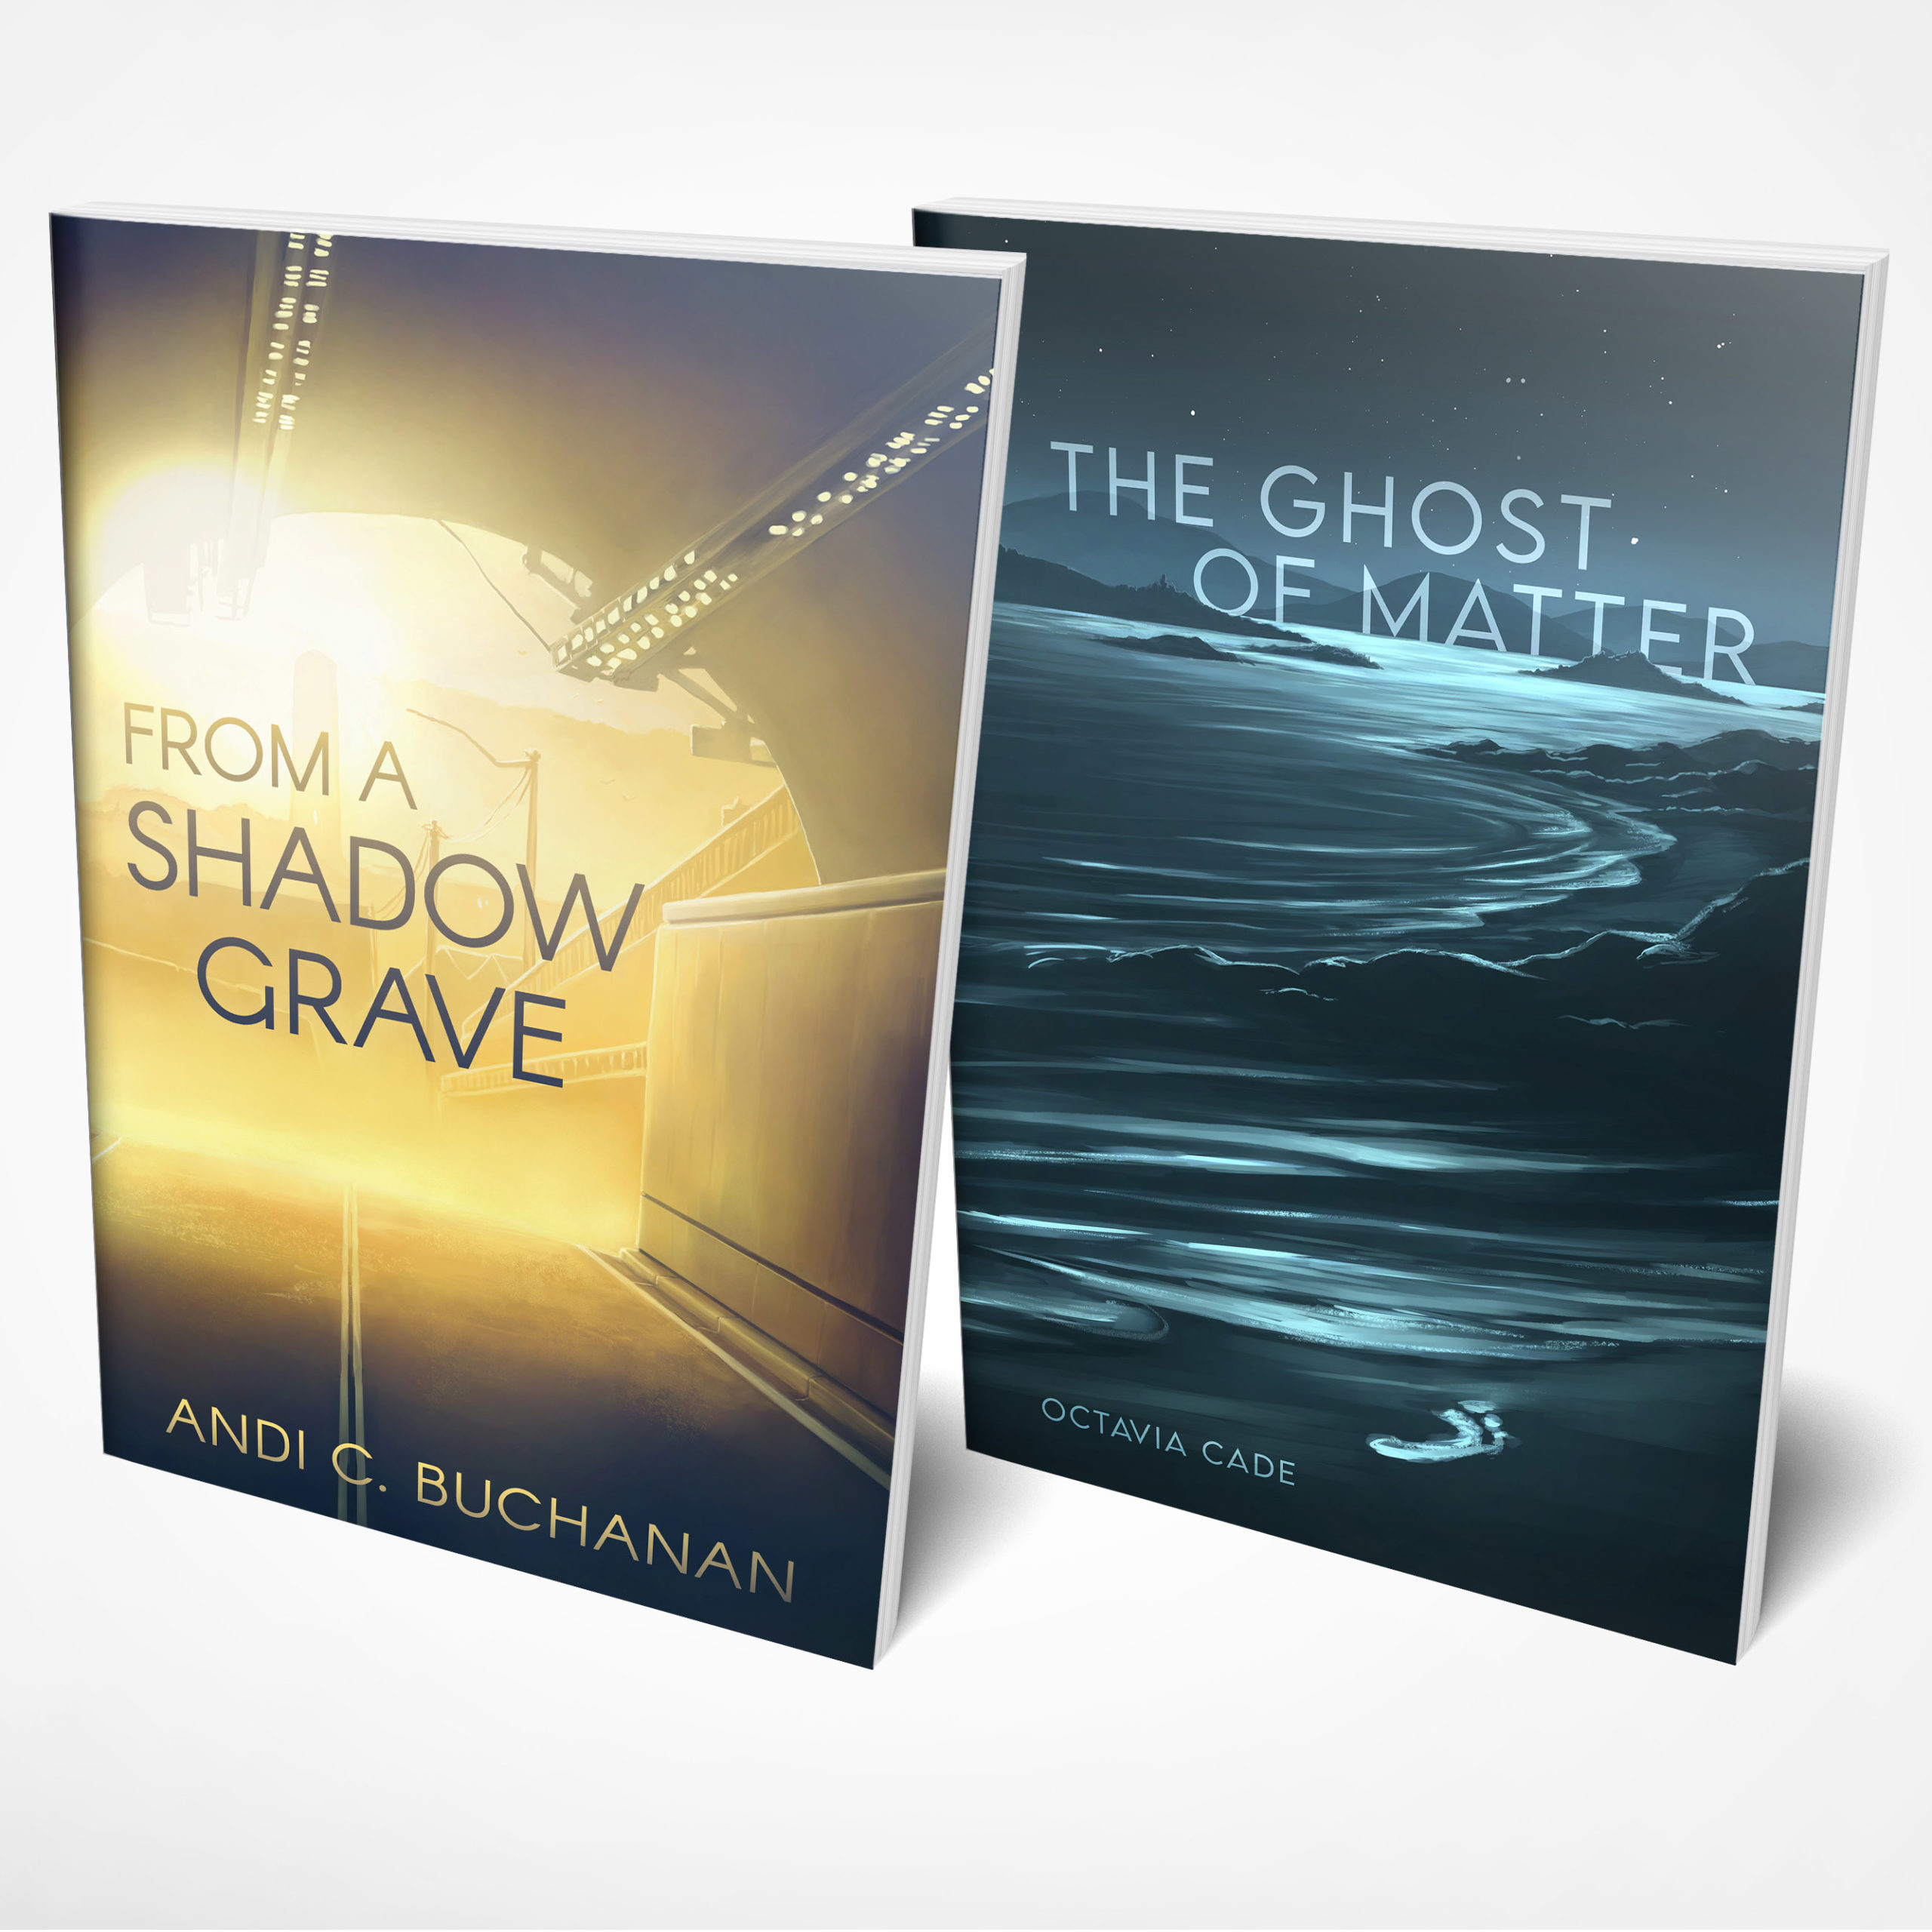 Image showing front covers of Andi C Buchanan's FROM A SHADOW GRAVE and Octavia Cade's THE GHOST OF MATTER